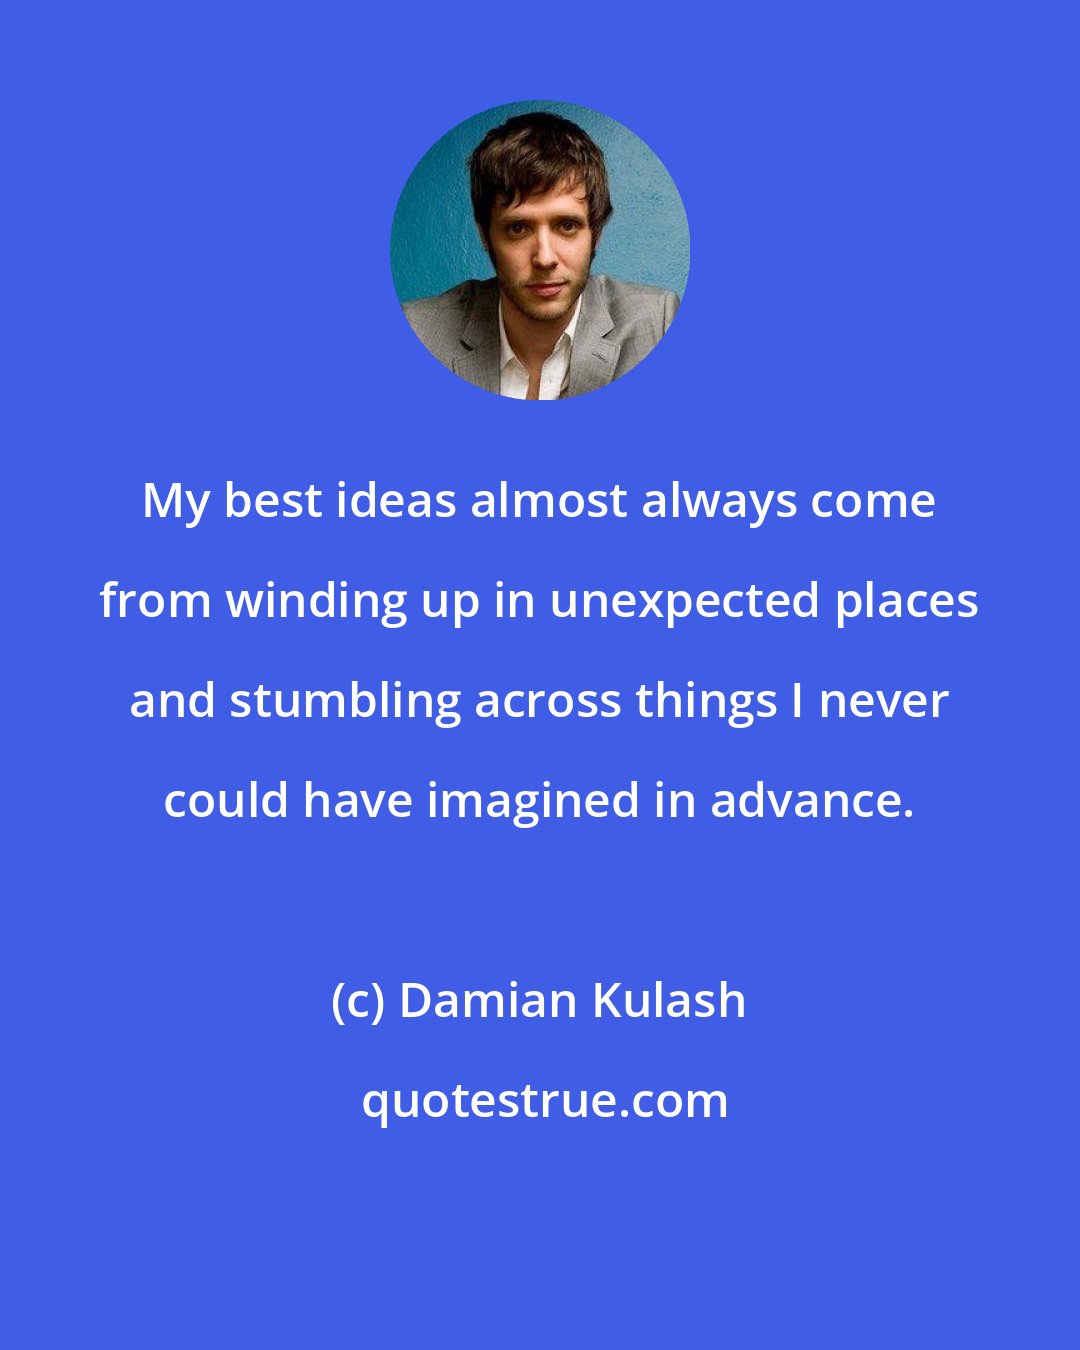 Damian Kulash: My best ideas almost always come from winding up in unexpected places and stumbling across things I never could have imagined in advance.